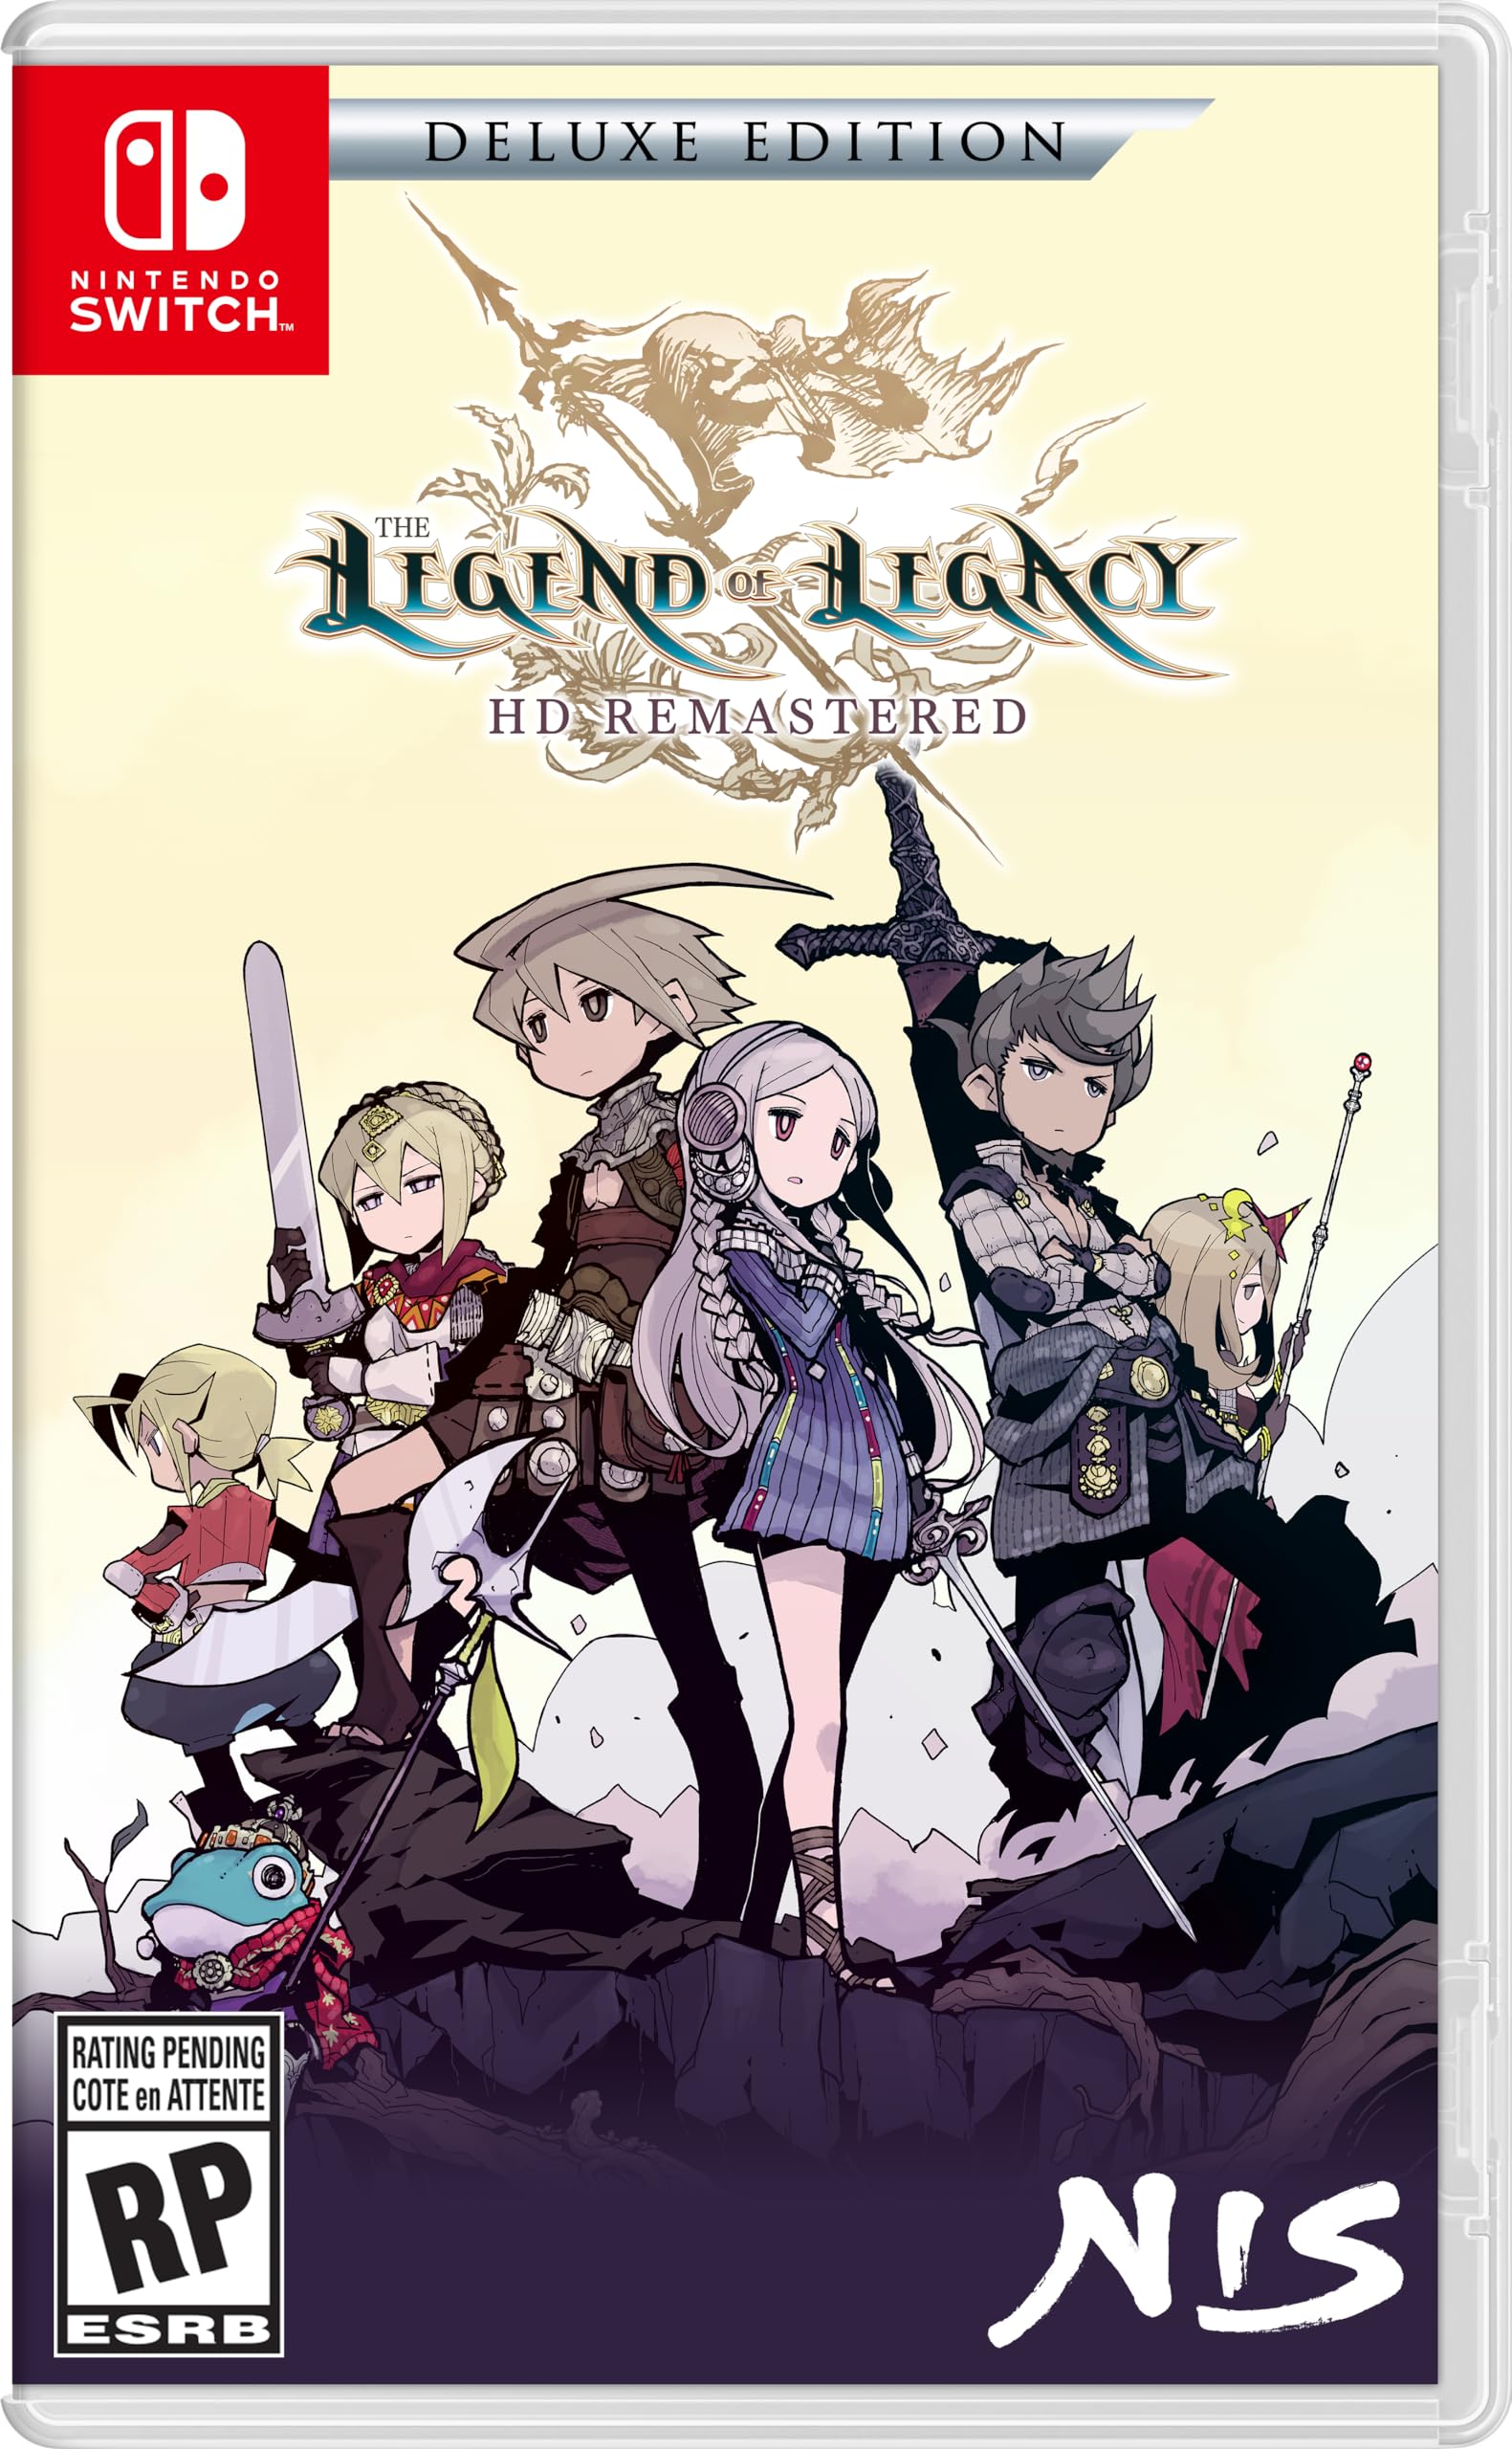 The Legend of Legacy HD Remastered: Deluxe Edition - (NSW) Nintendo Switch Video Games NIS America   